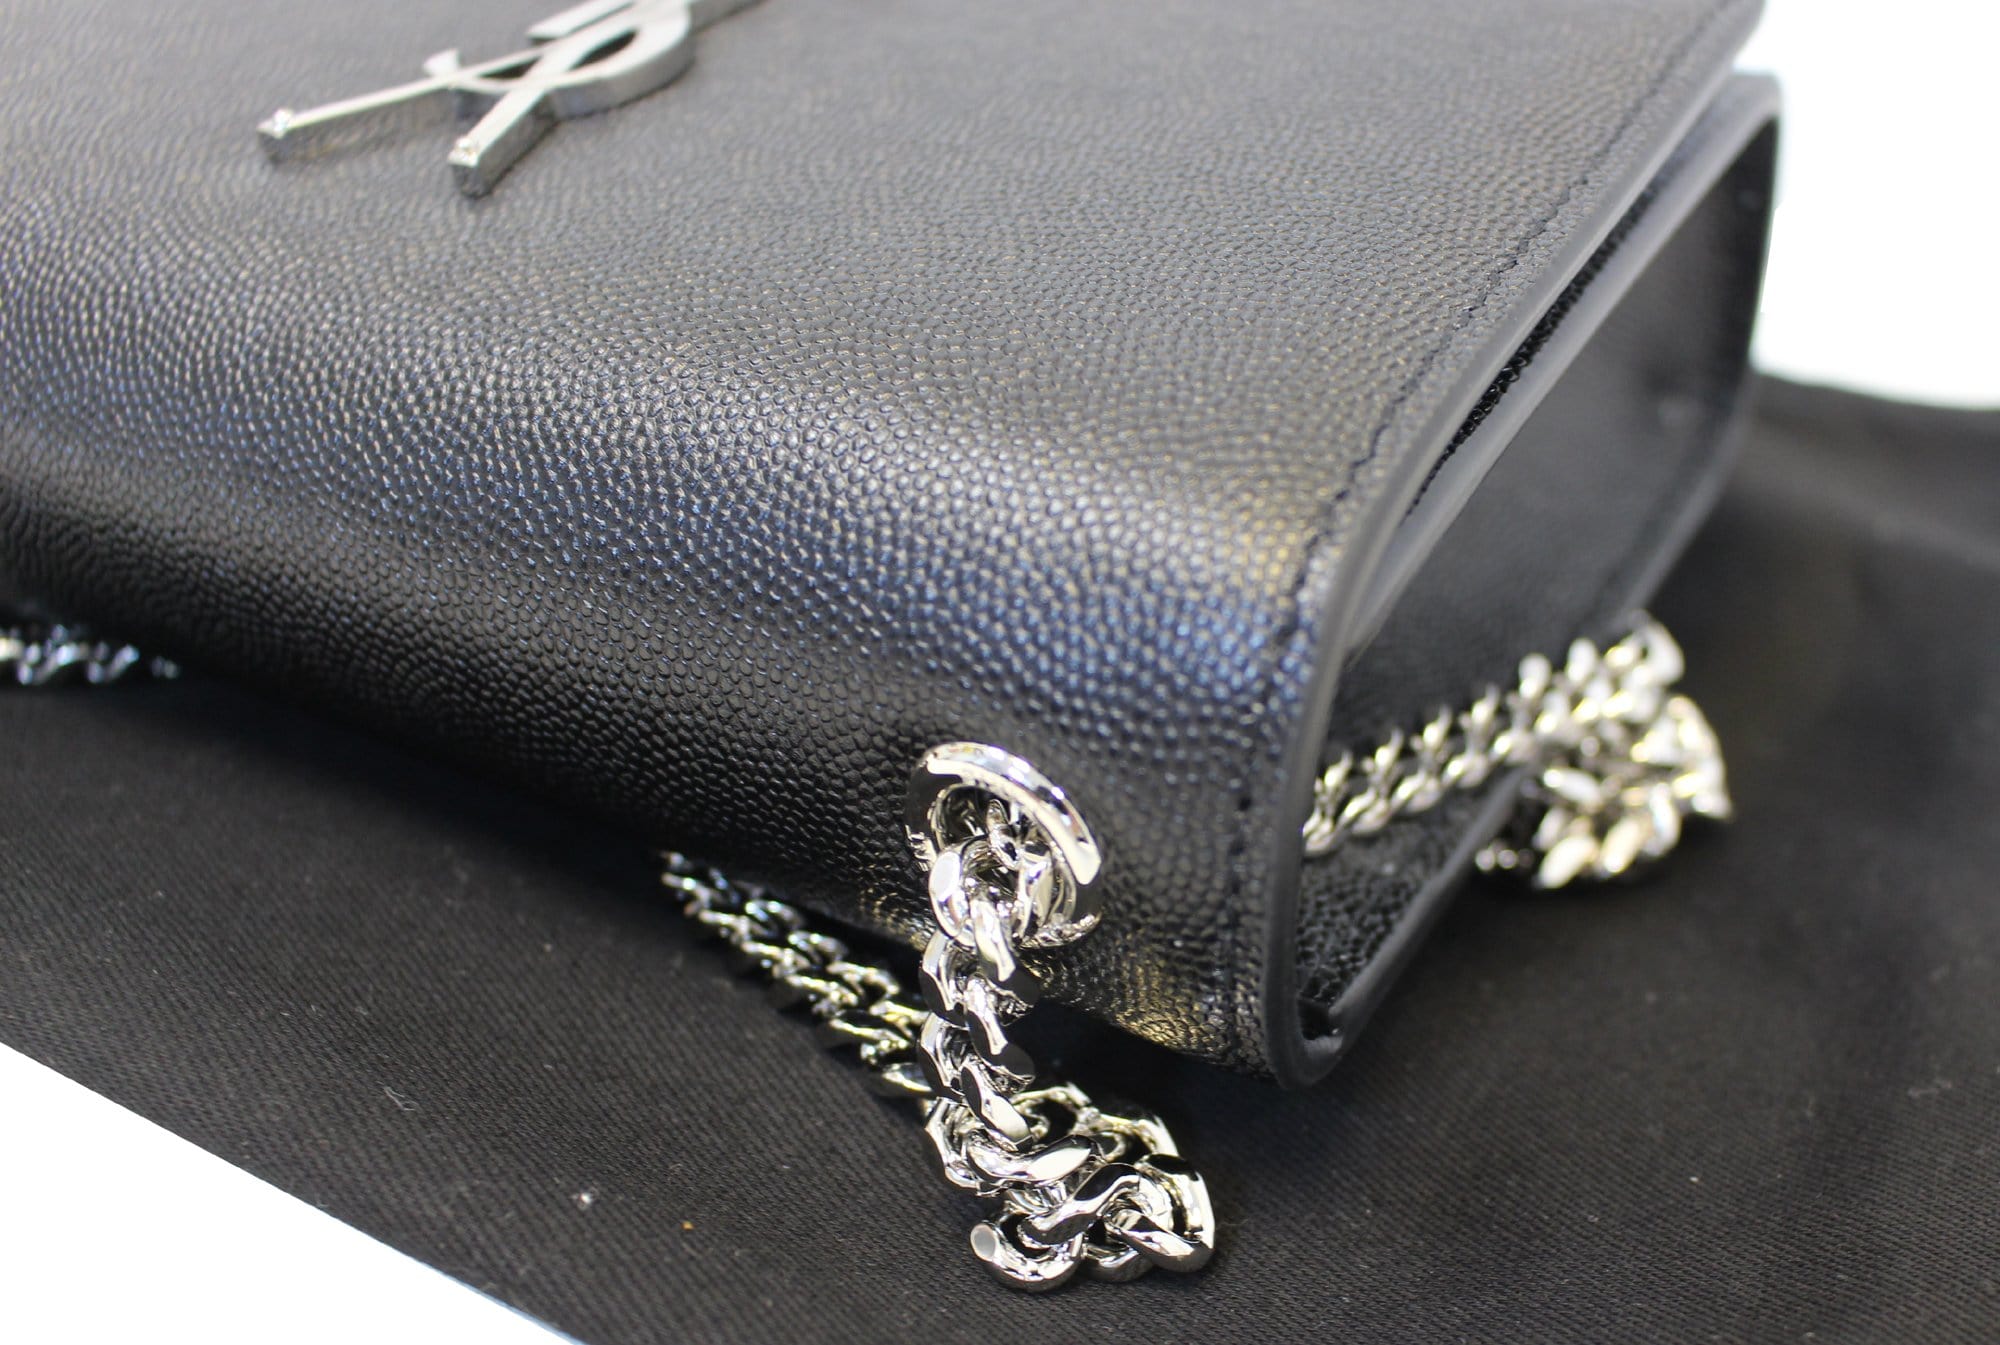 Yves Saint Laurent YSL Kate Clutch with tassel Black Leather ref